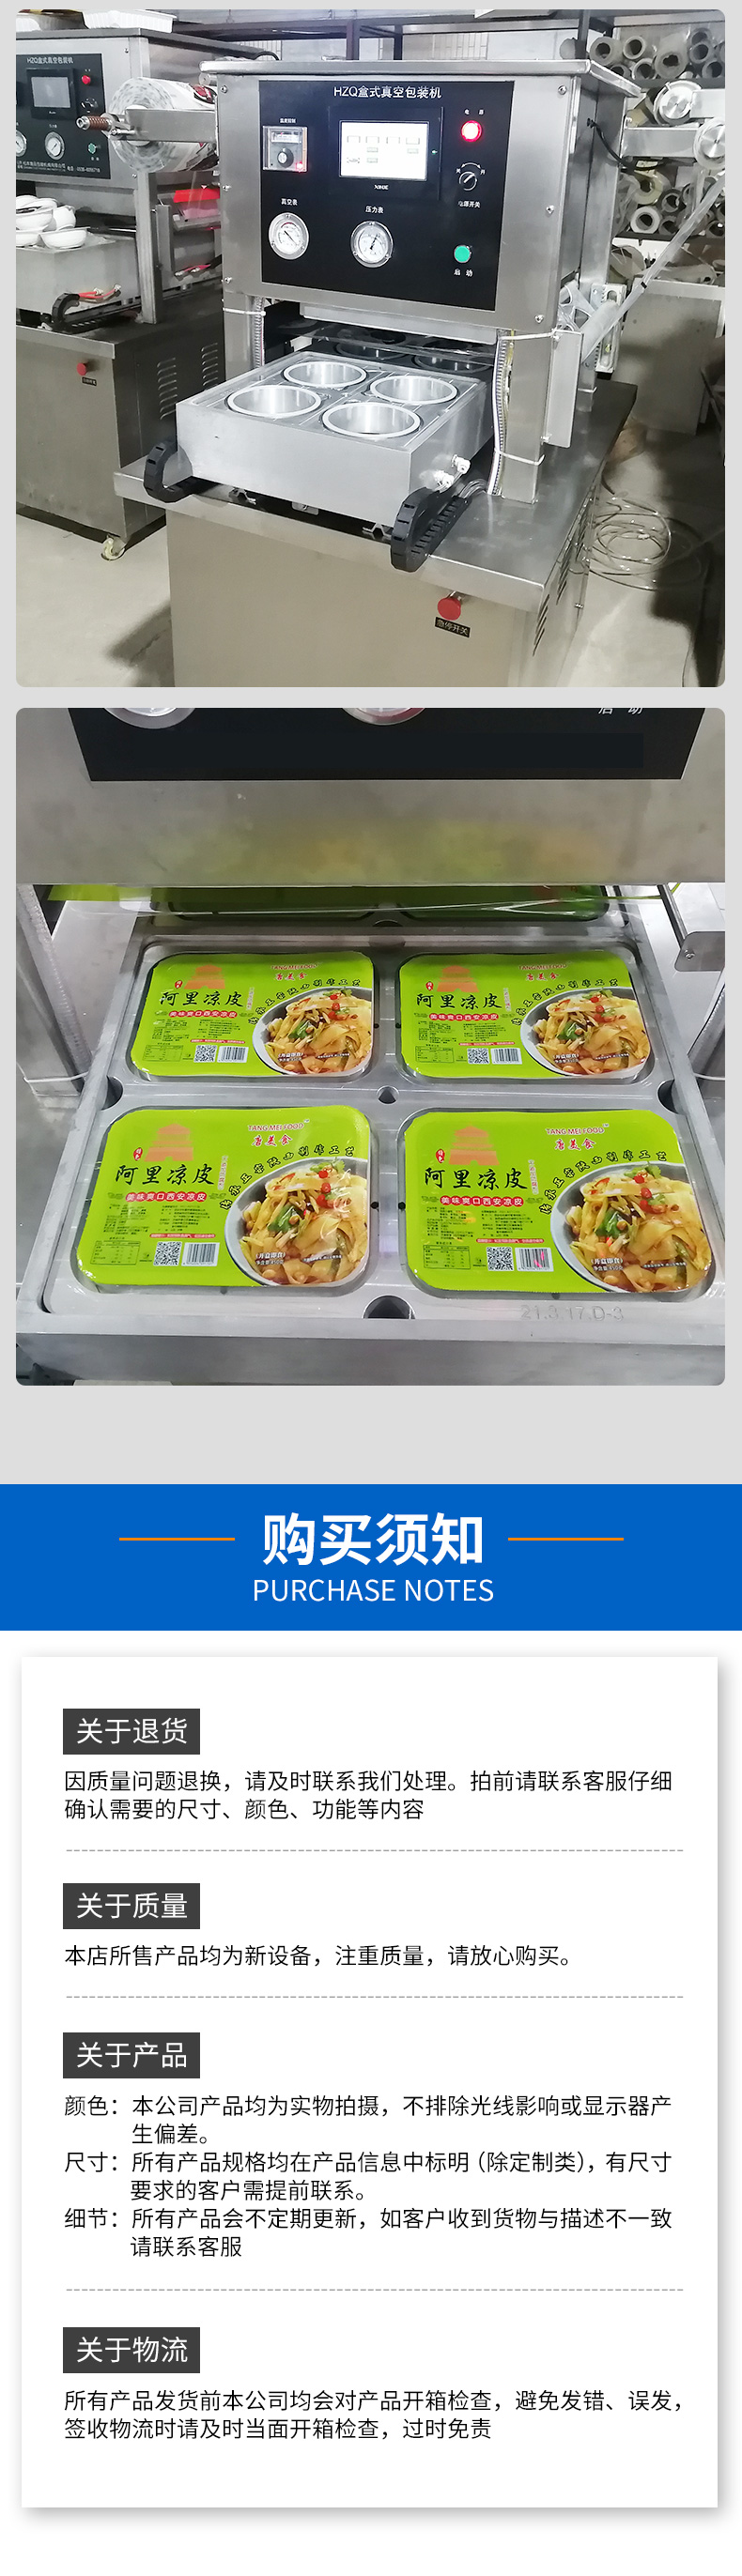 Film Cherry Box HZQ-390 Modified Atmosphere Packaging Machine Prefabricated Vegetable Preservation Vacuum Sealing Machine Yongliang Brand